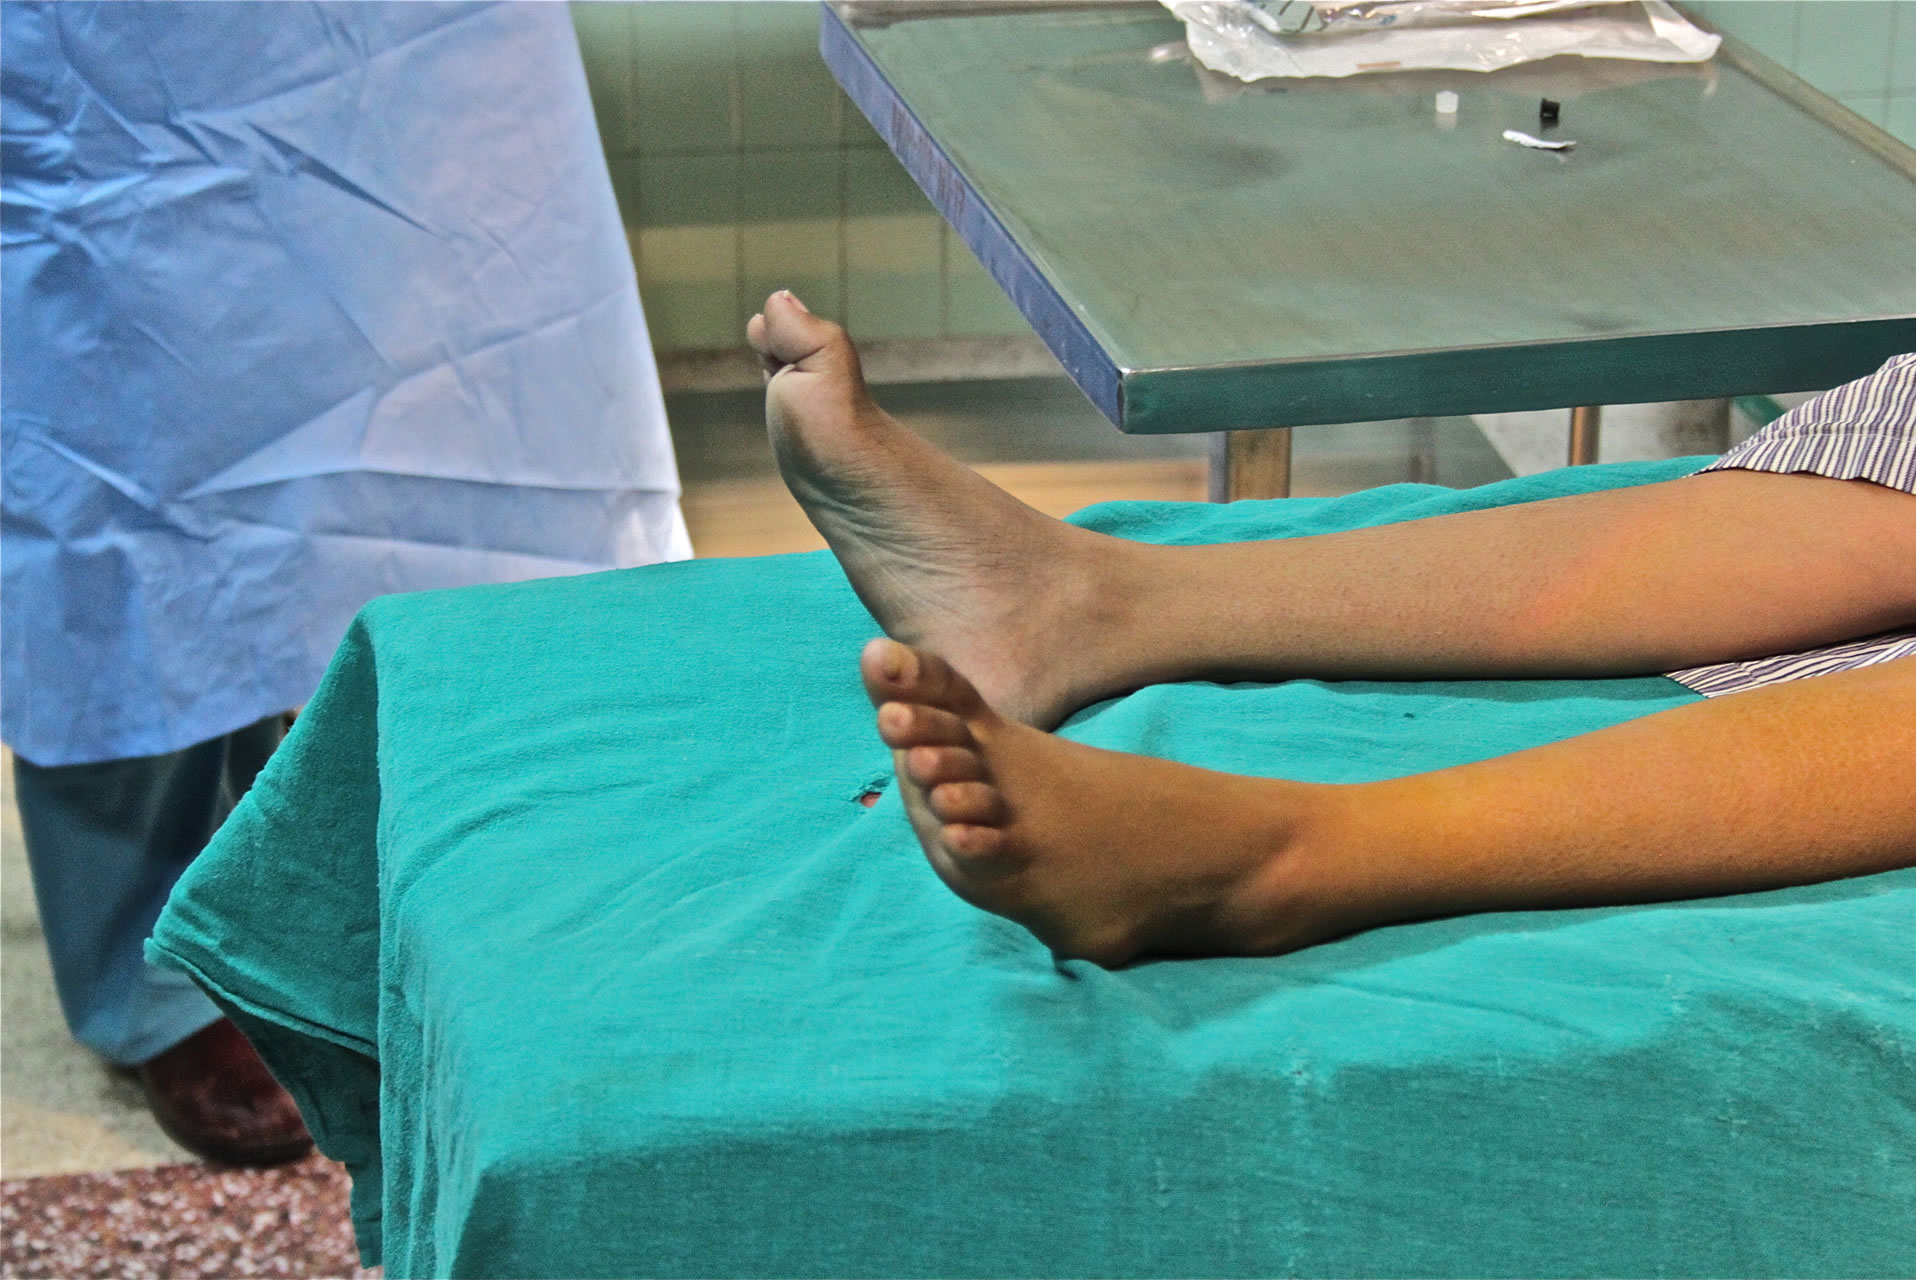 Subarachnoid and Peripheral Nerve Block in a Patient with Charcot-Marie